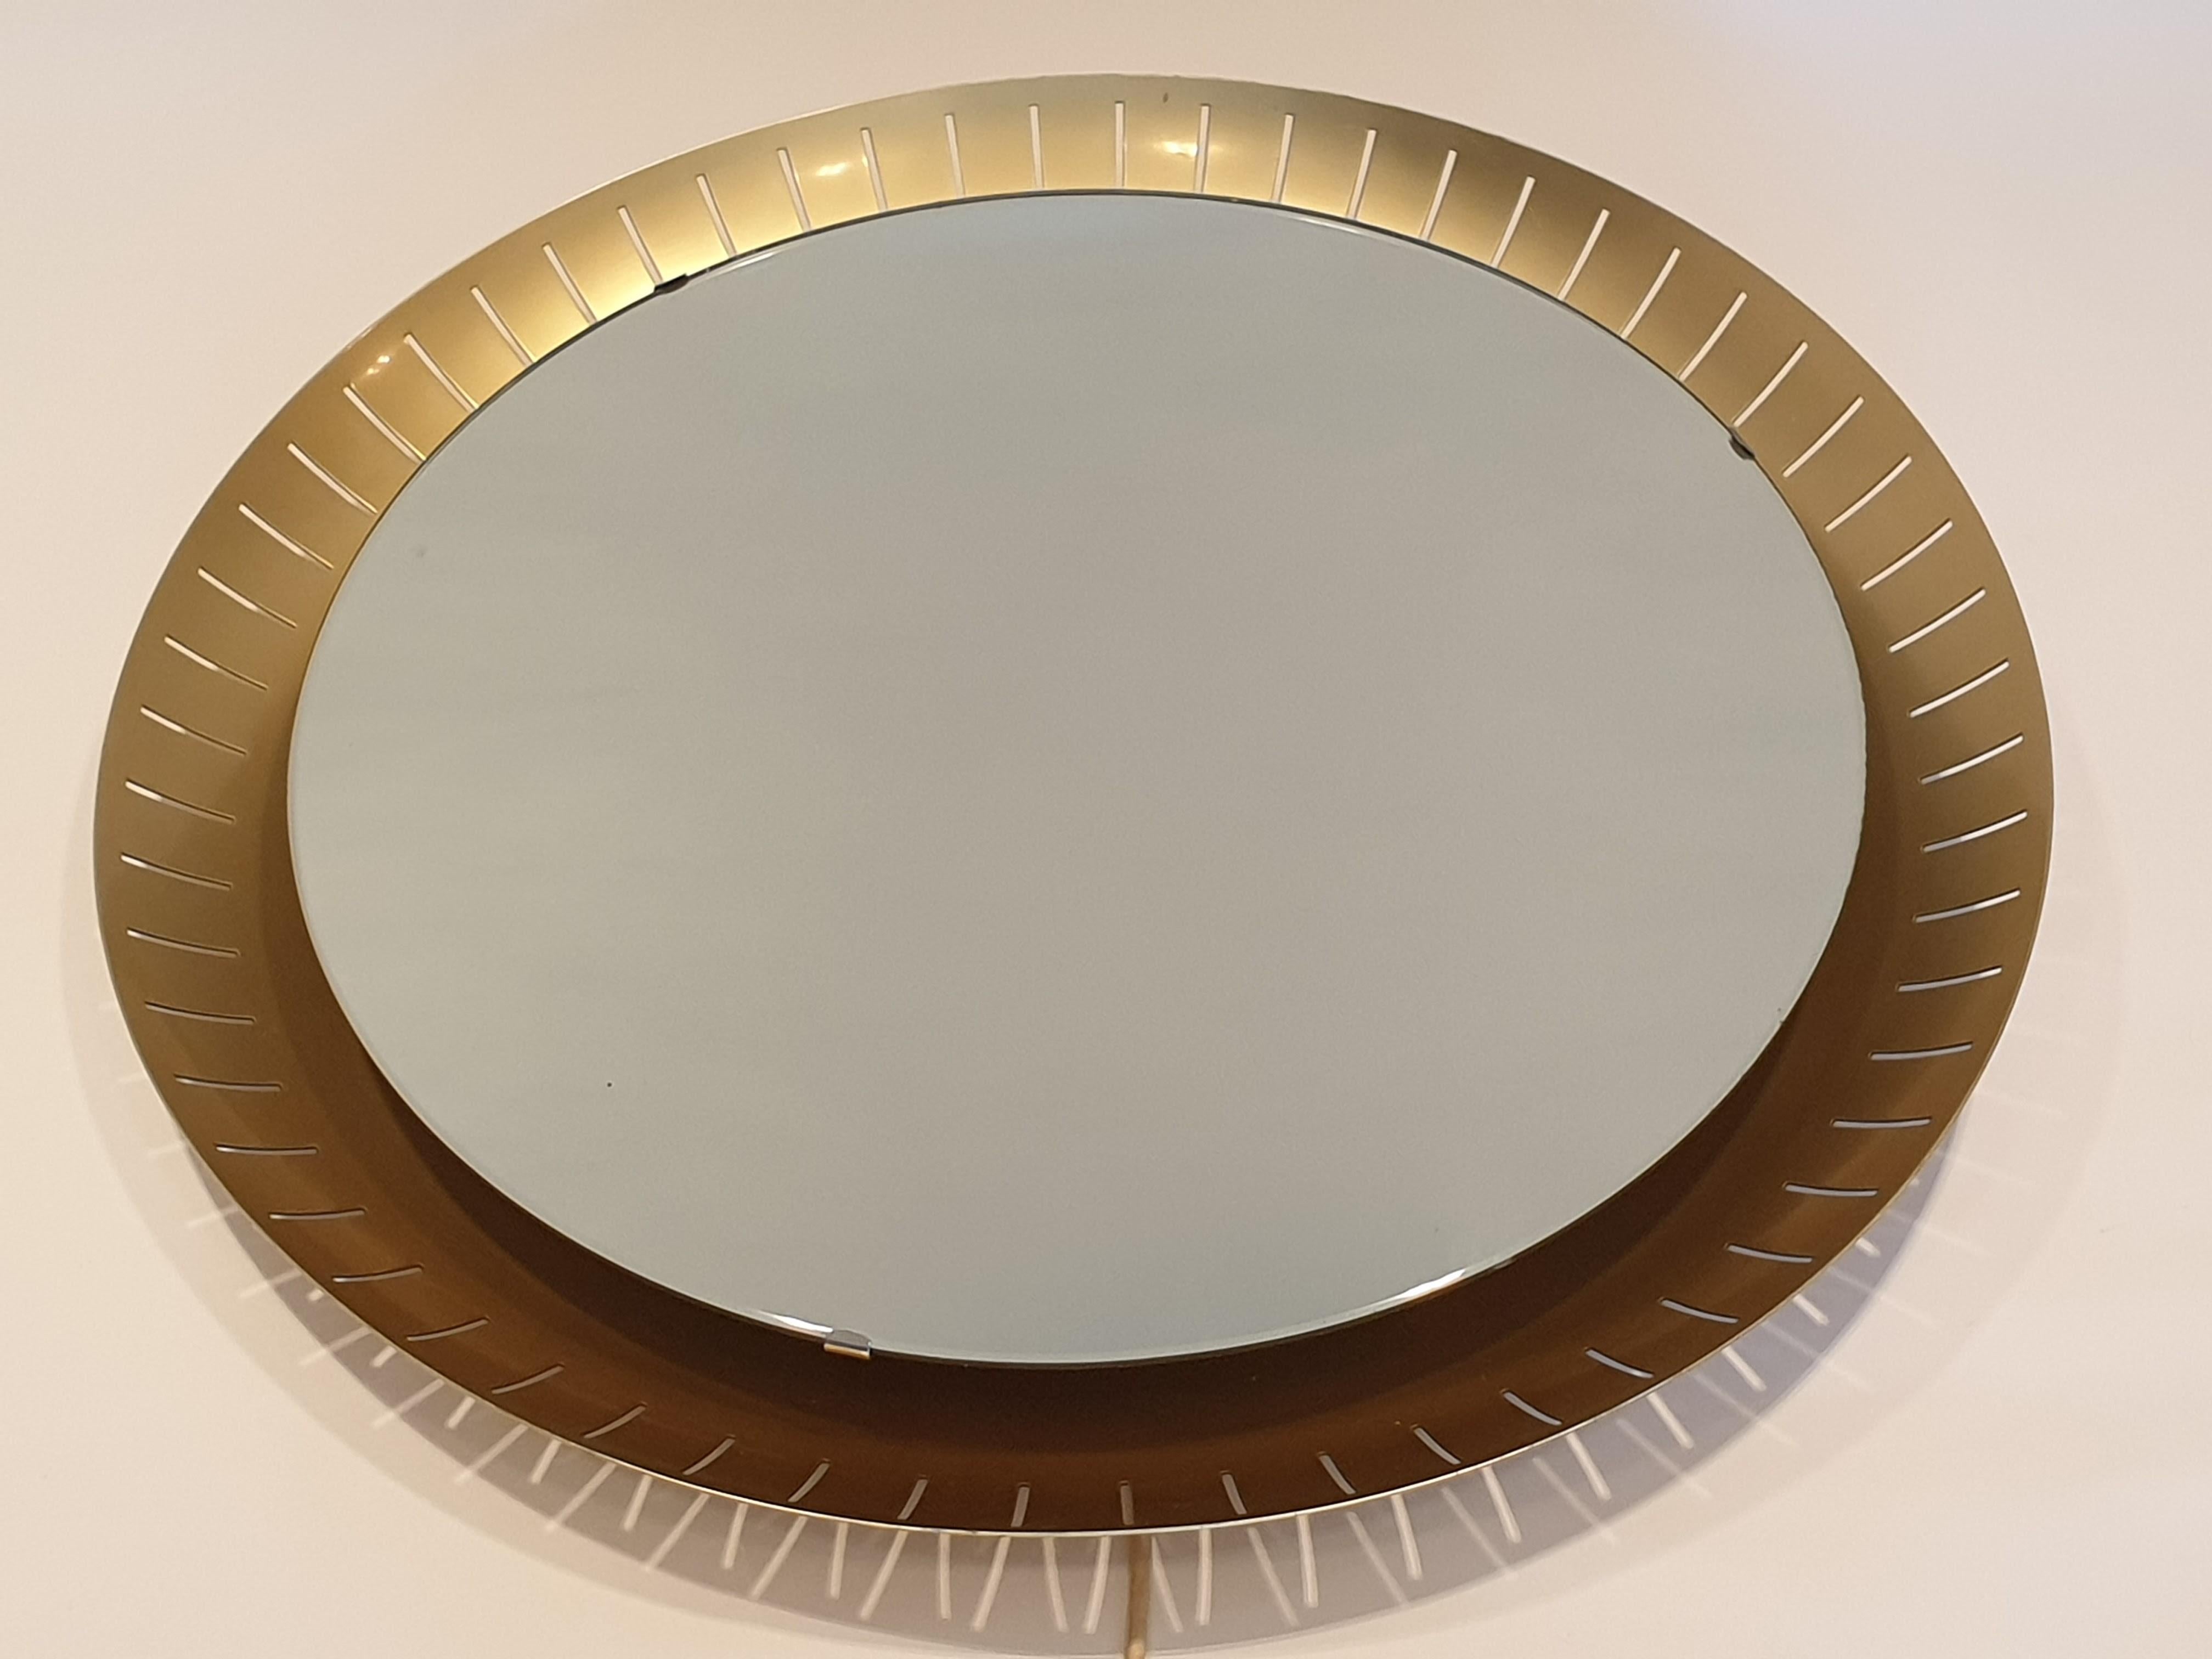 Large illuminated Italian mirror by Stilnovo, with brushed anodised aluminium pierced fretwork frame. The mirror is held in place by metal clips which are easily removable to change the lighting element beneath as can be seen by the photograph. Due